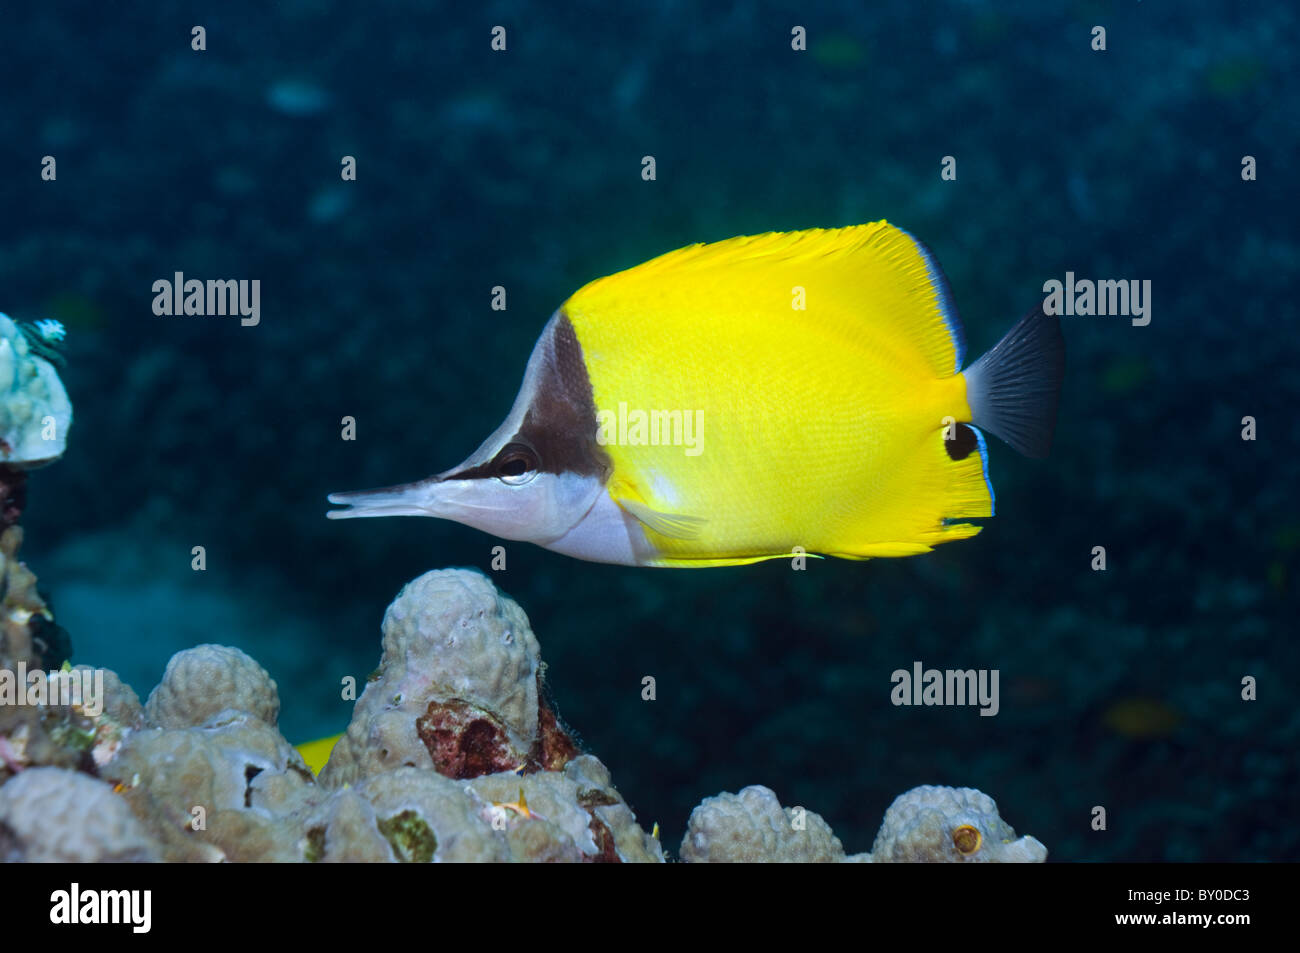 Long-nosed butterflyfish (Forcipiger flavissimus). Stock Photo